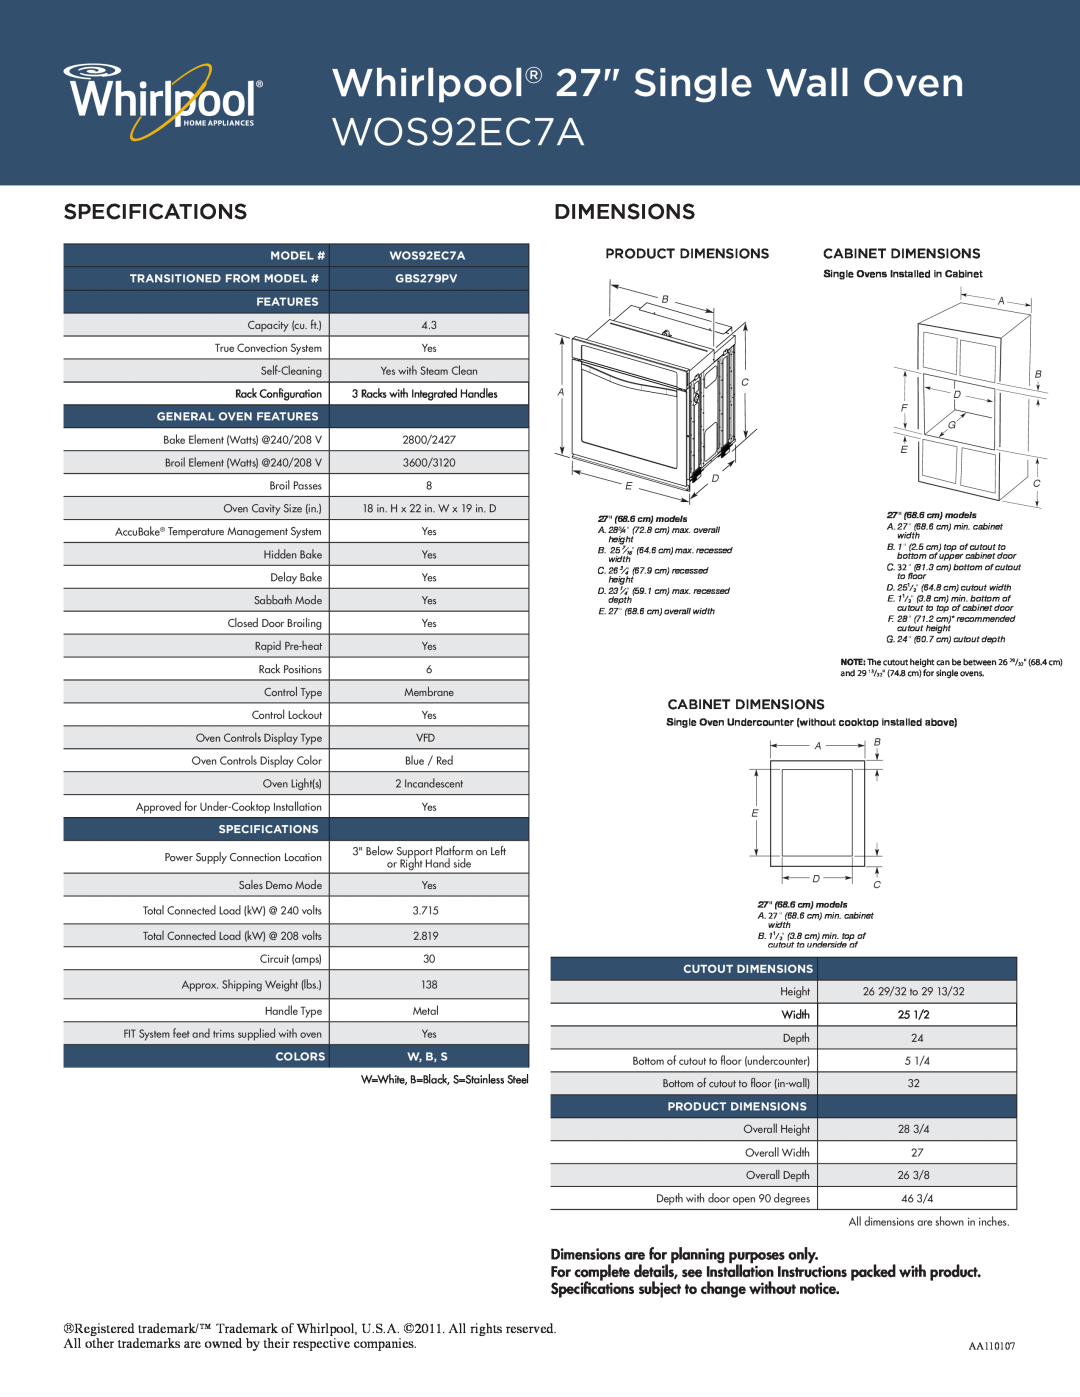 Whirlpool WOS51EC0A manual SpecificationsDimensions, Whirlpool 27 Single Wall Oven WOS92EC7A, Product Dimensions 